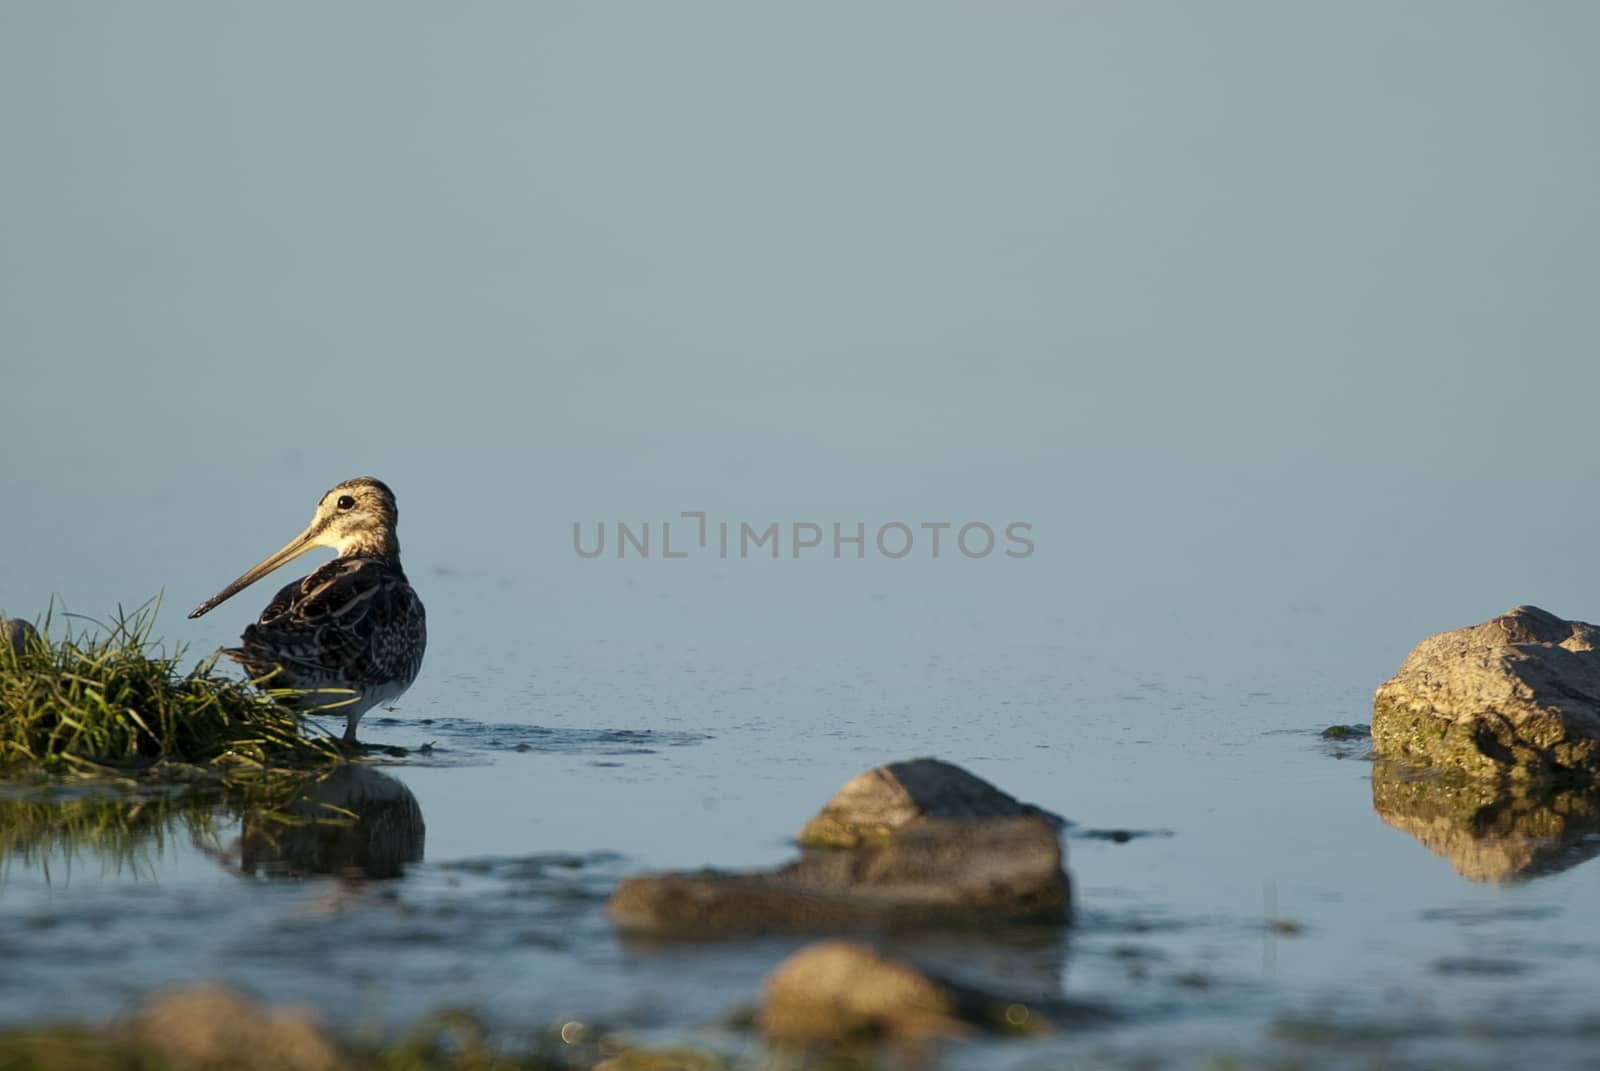 Common Snipe (Gallinago gallinago), looking for food in the wate by jalonsohu@gmail.com